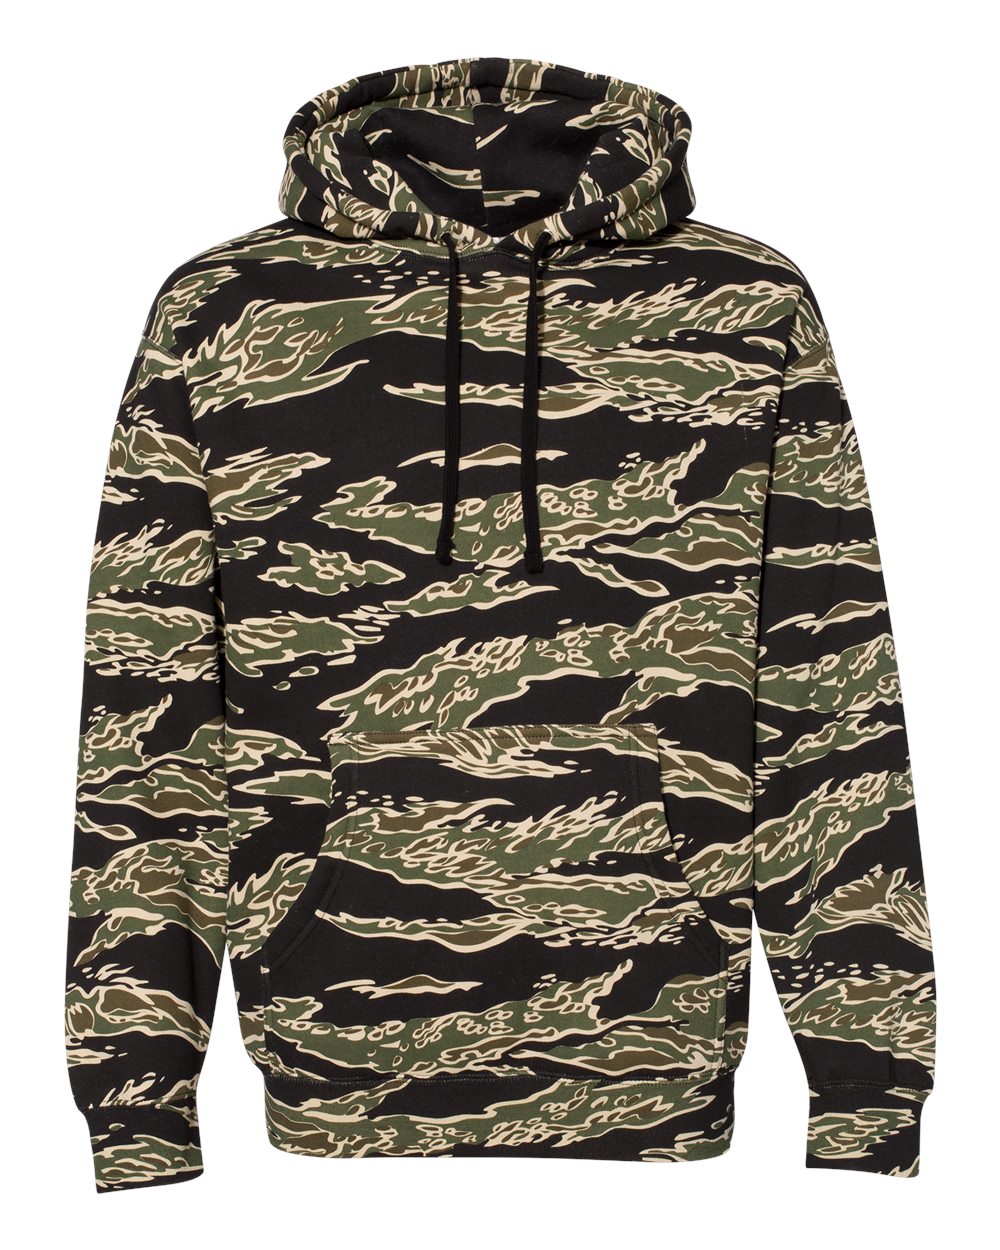 Independent Trading Co. IND4000 Hooded Pullover Sweatshirt - Army Camo - XS